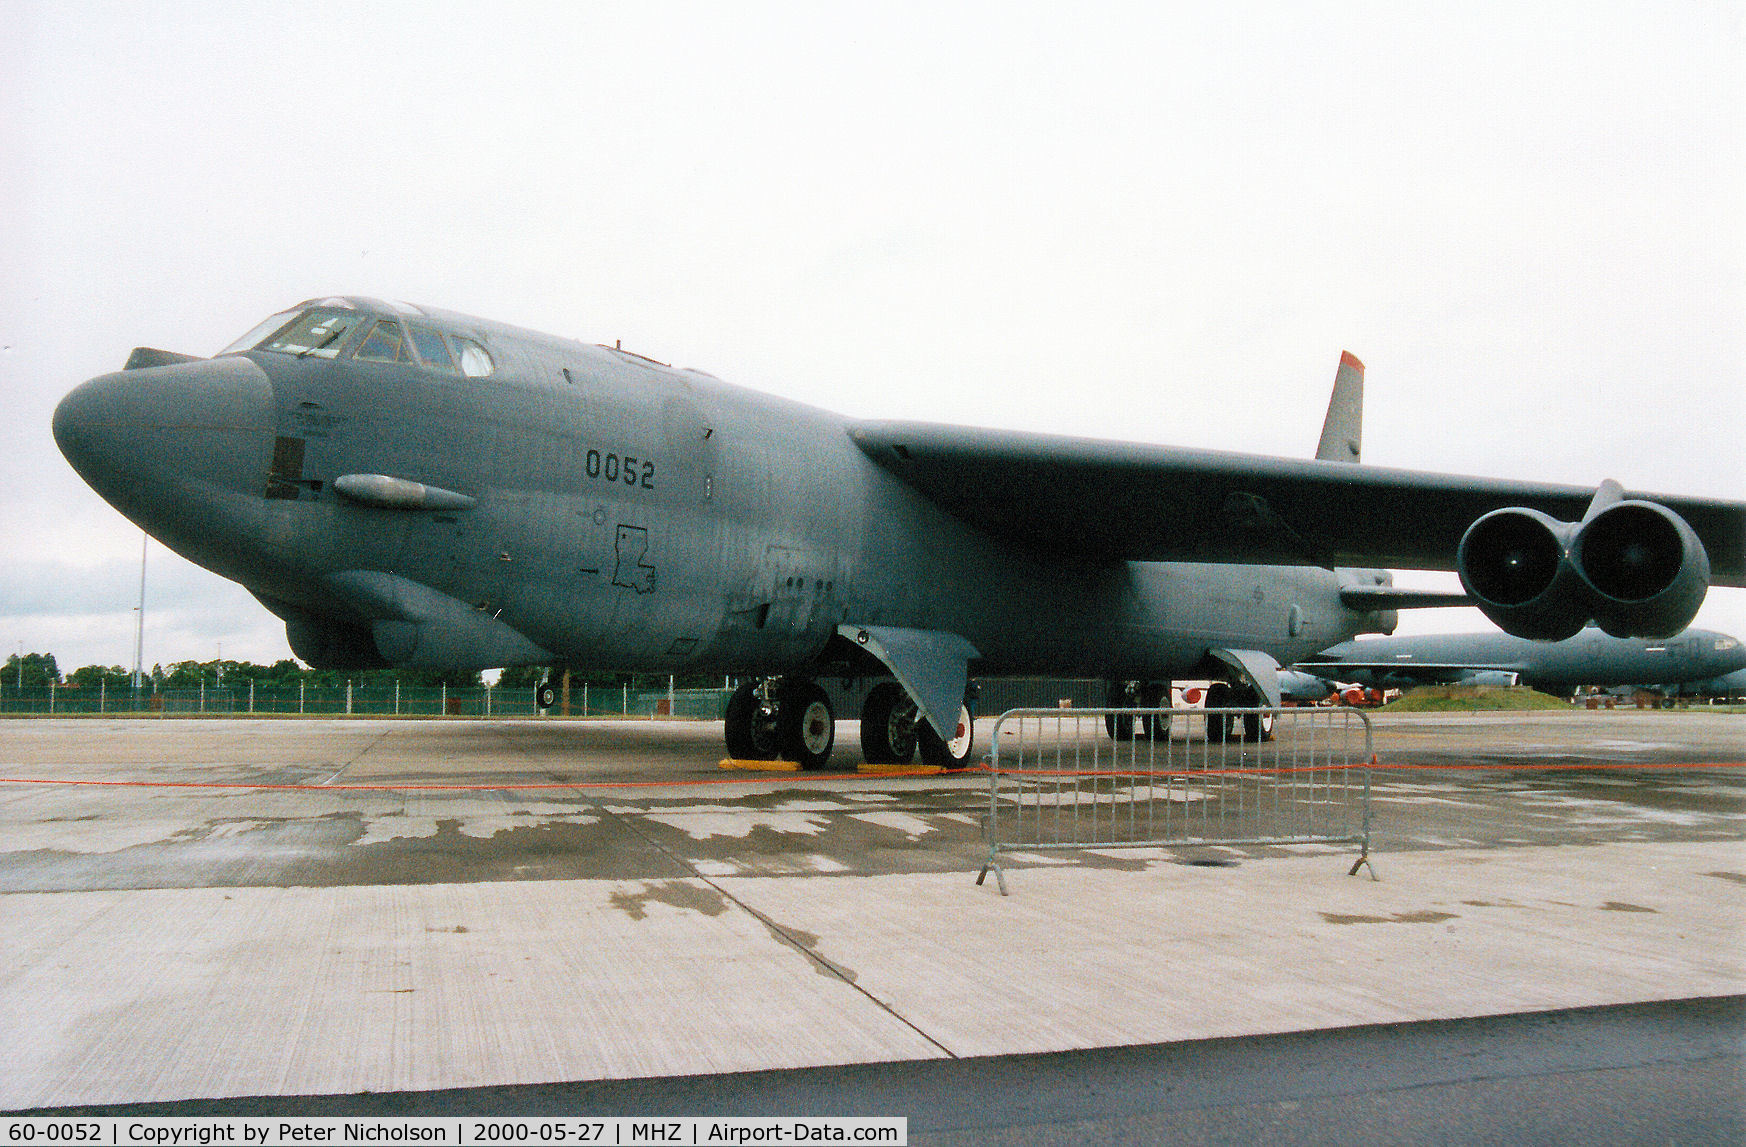 60-0052, 1960 Boeing B-52H Stratofortress C/N 464417, B-52H Stratofortress of 96th Bomb Squadron/2nd Bombardment Wing at Barksdale AFB on display at the 2000 RAF Mildenhall Air Fete.